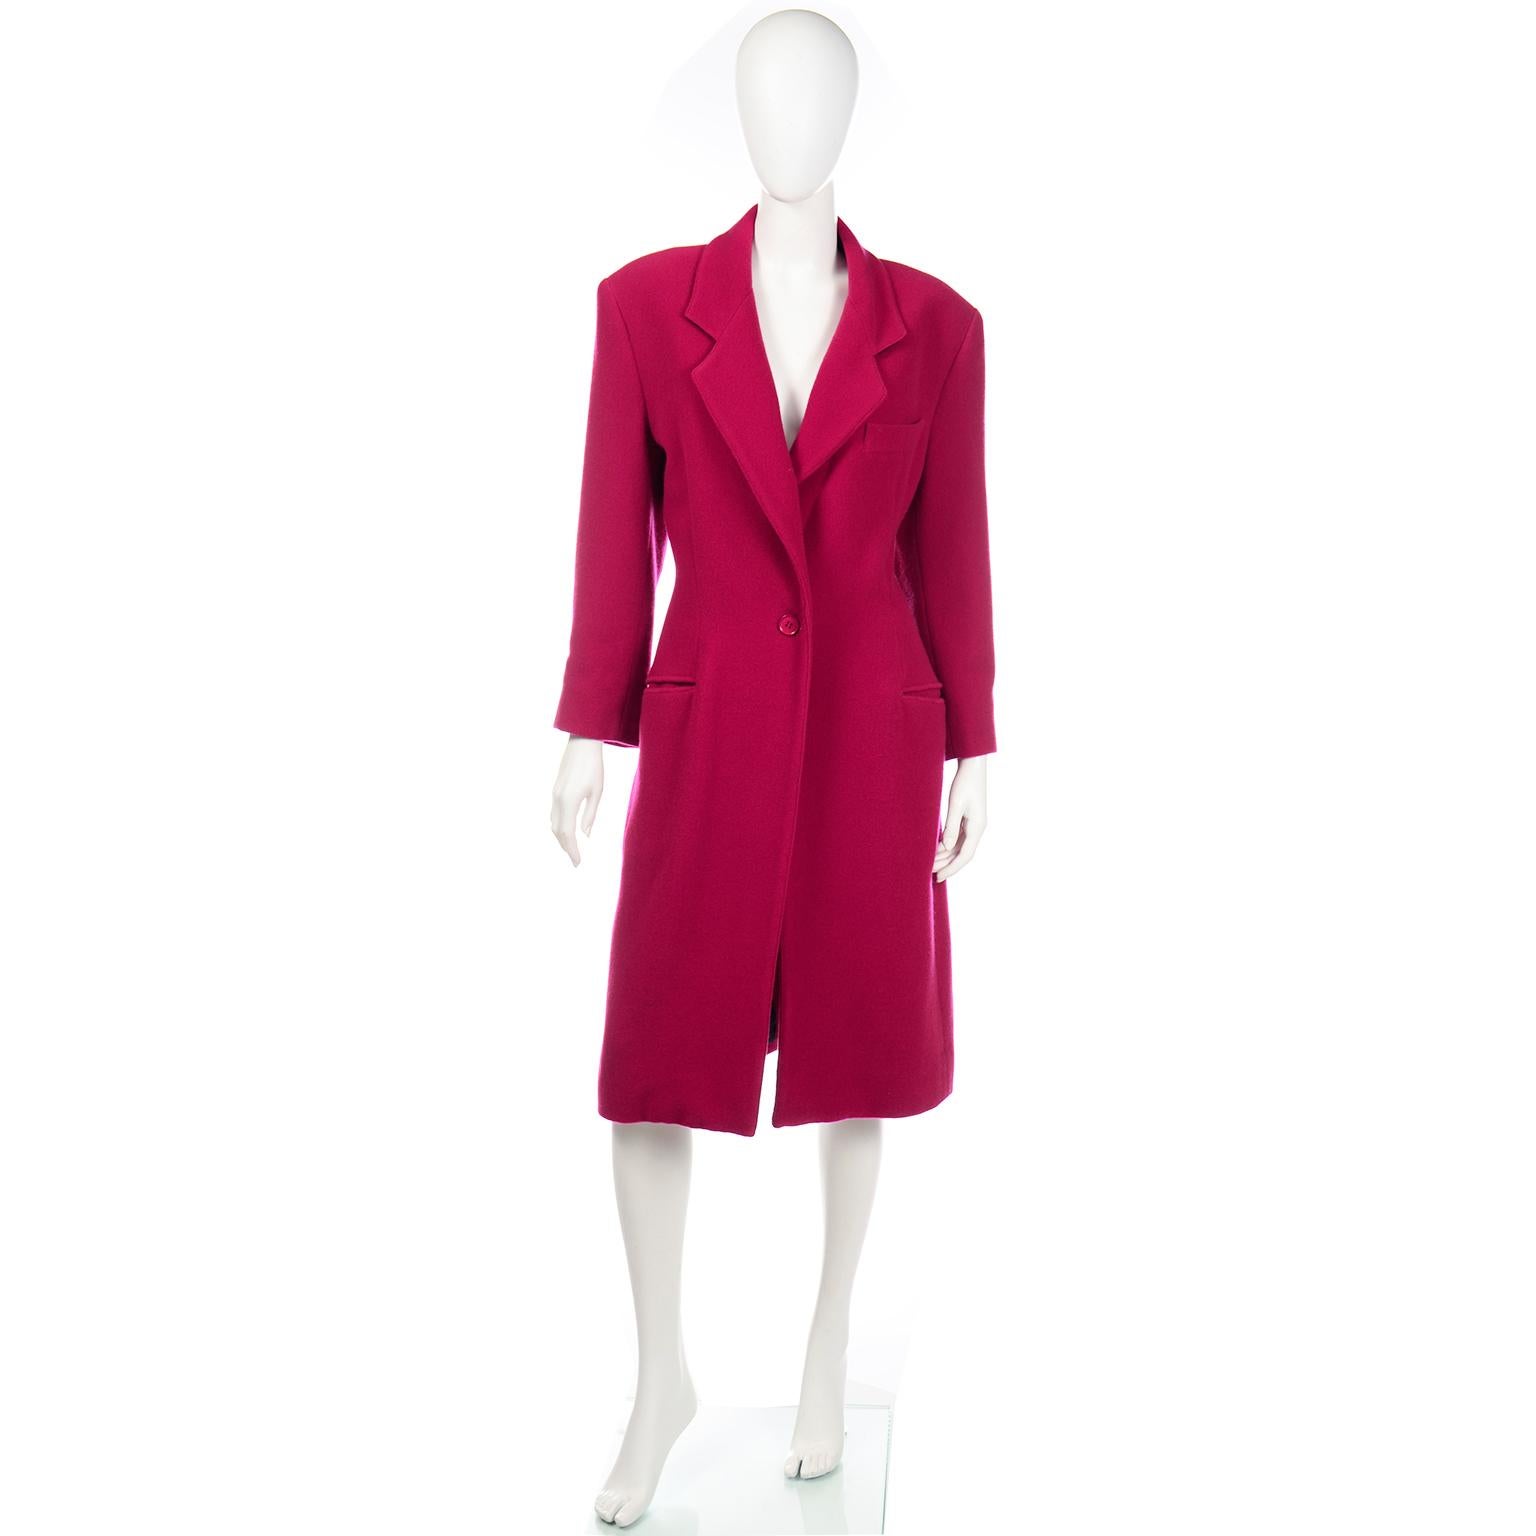 This luxe raspberry Gianfranco Ferre coat is fully lined and feels like a cashmere wool blend. This elegant coat closes with a single button at the waist and has slash hip pockets.  We love Gianfranco Ferre and especially love the rich color of this